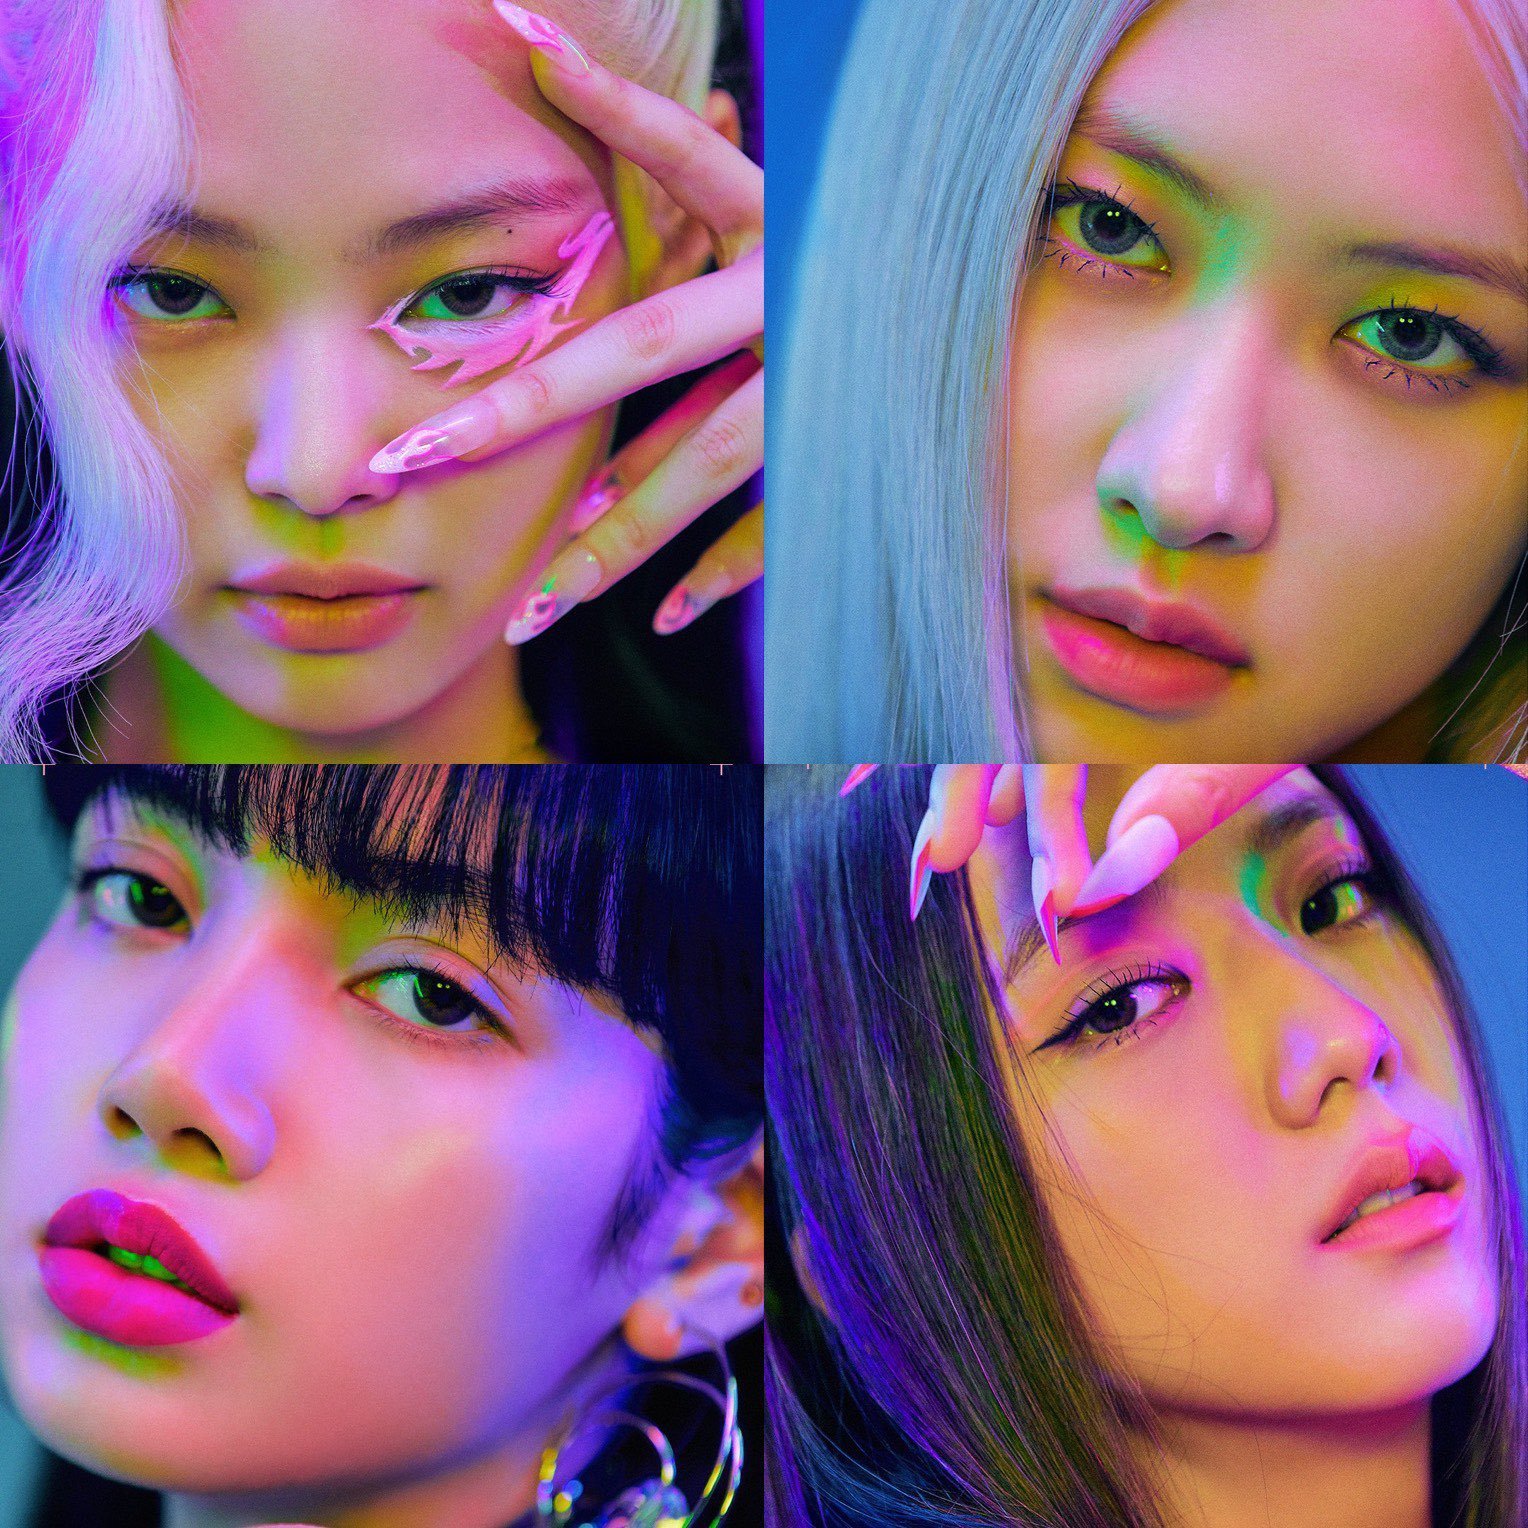 [single] BLACKPINK - "How You Like That" - Page 46 - Music ...